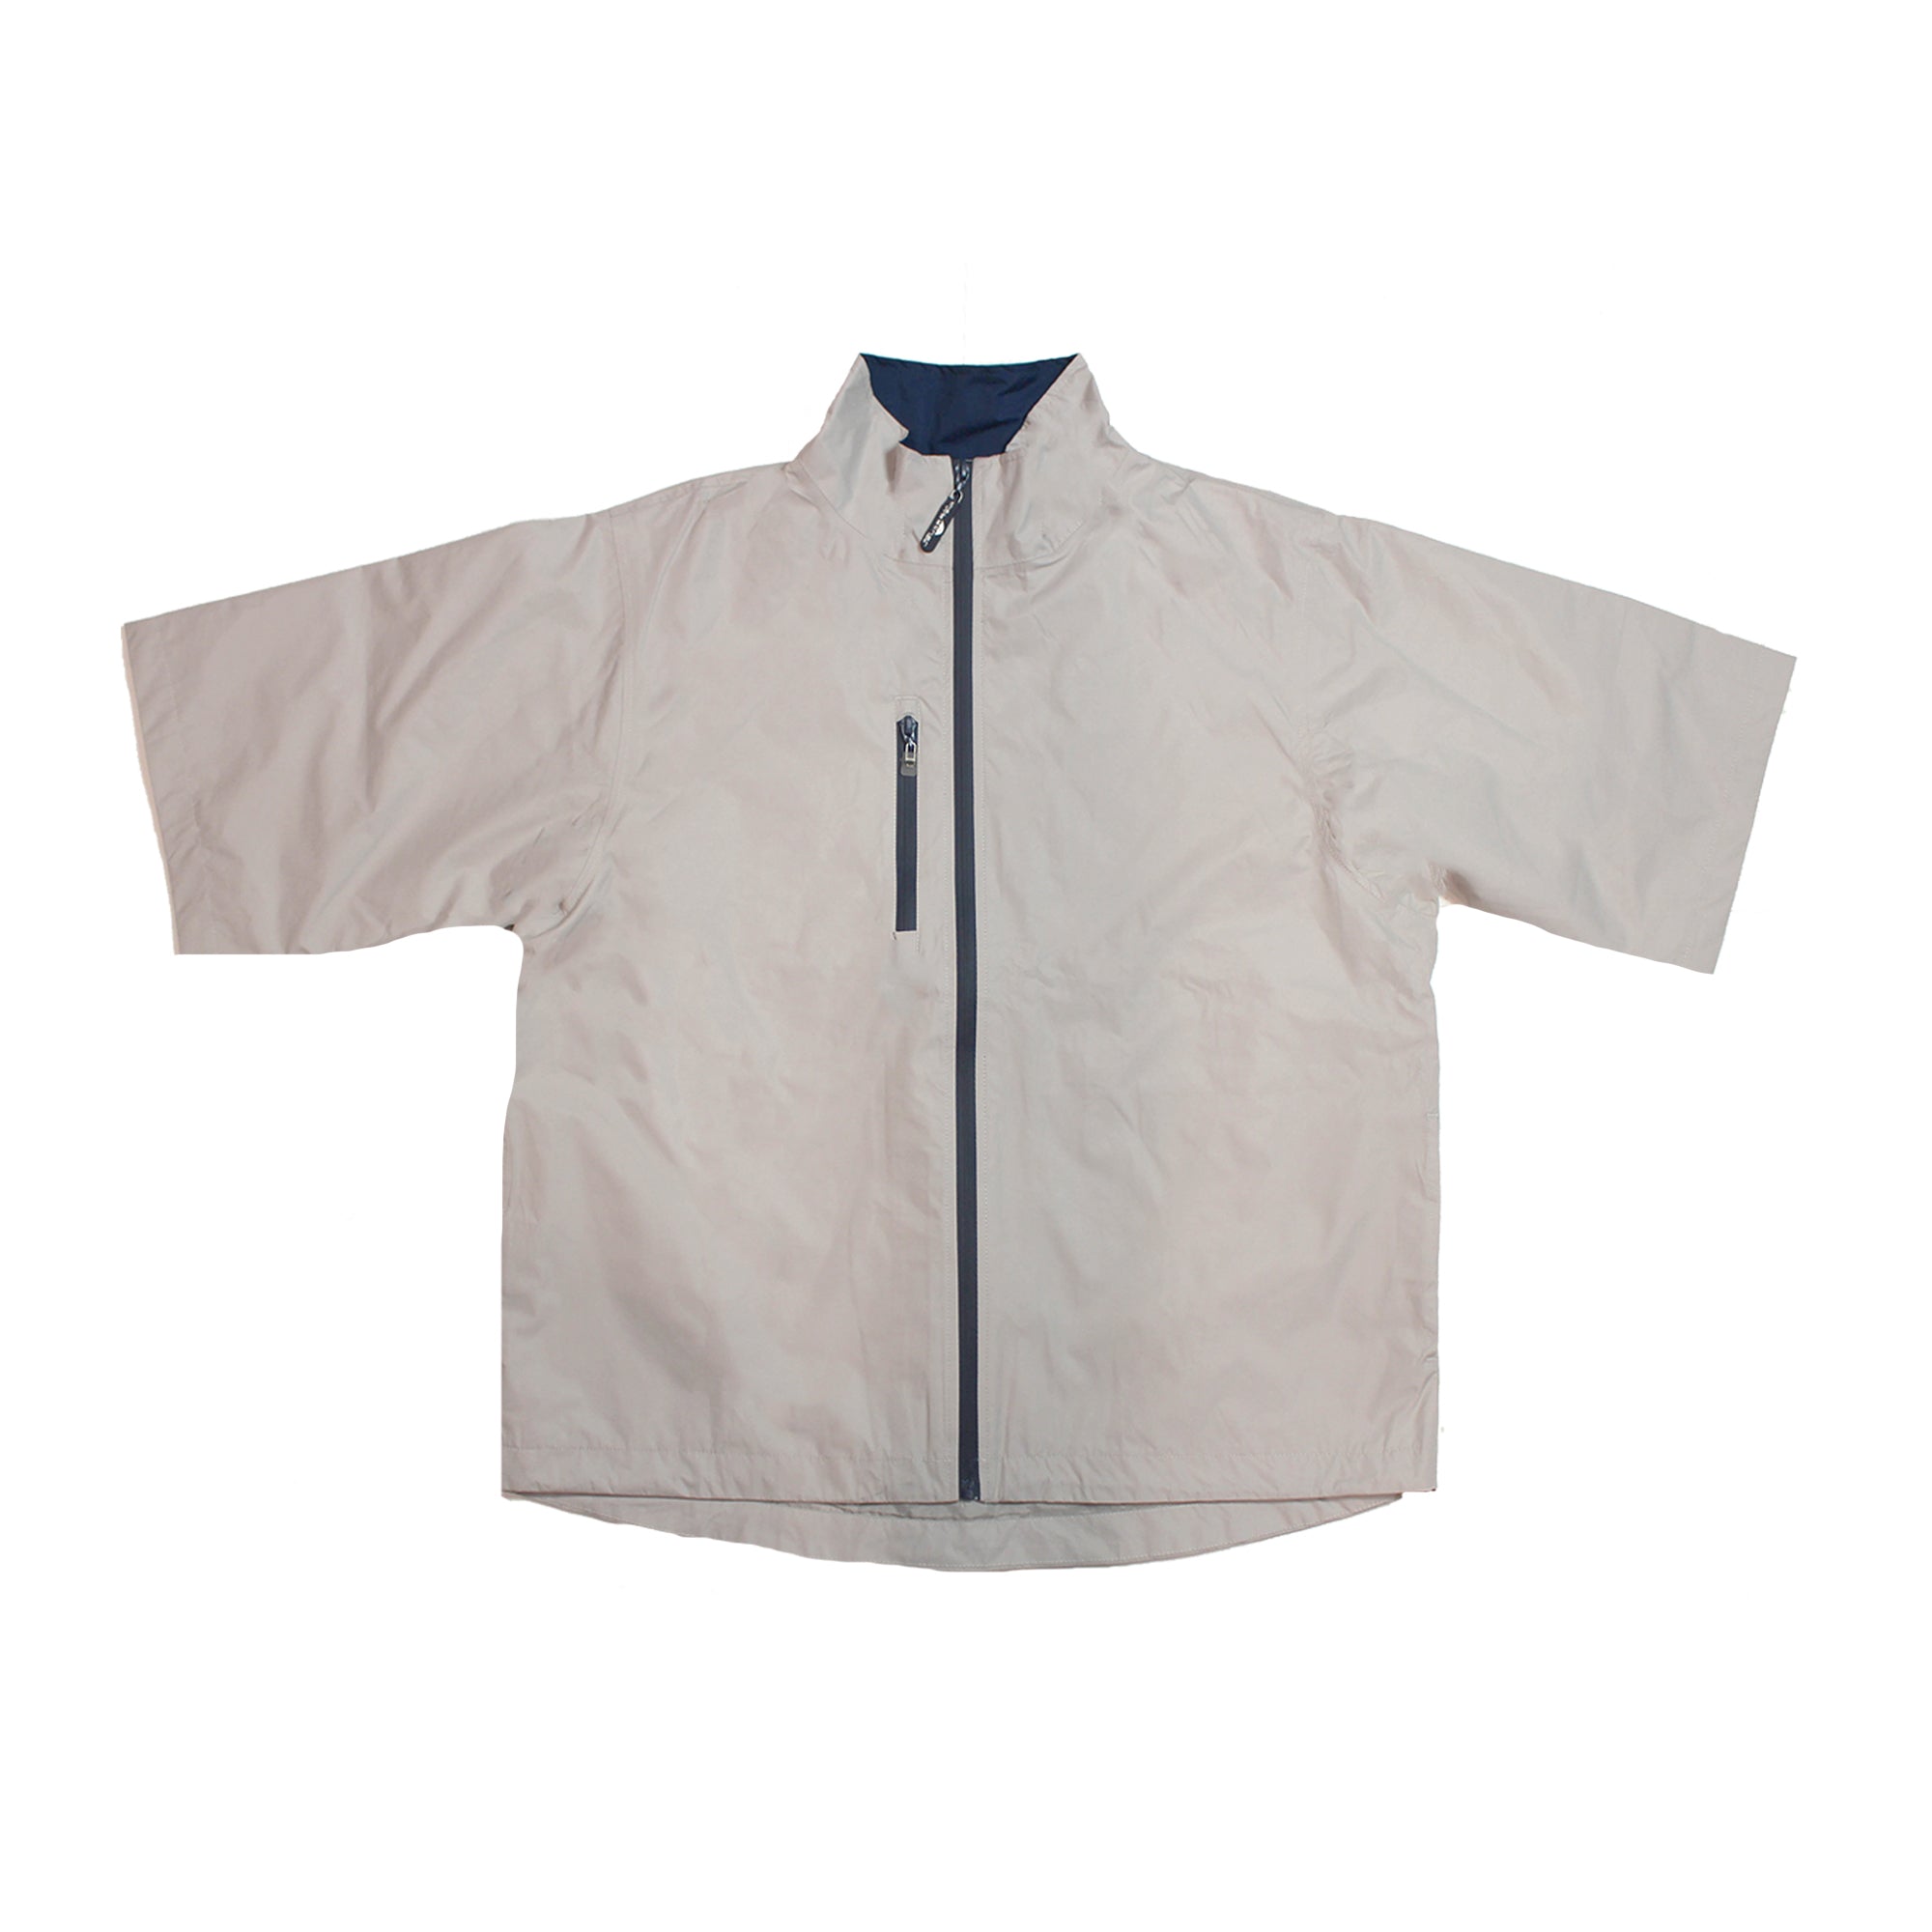 Men's Short-Sleeved Jacket – The Weather Apparel Company